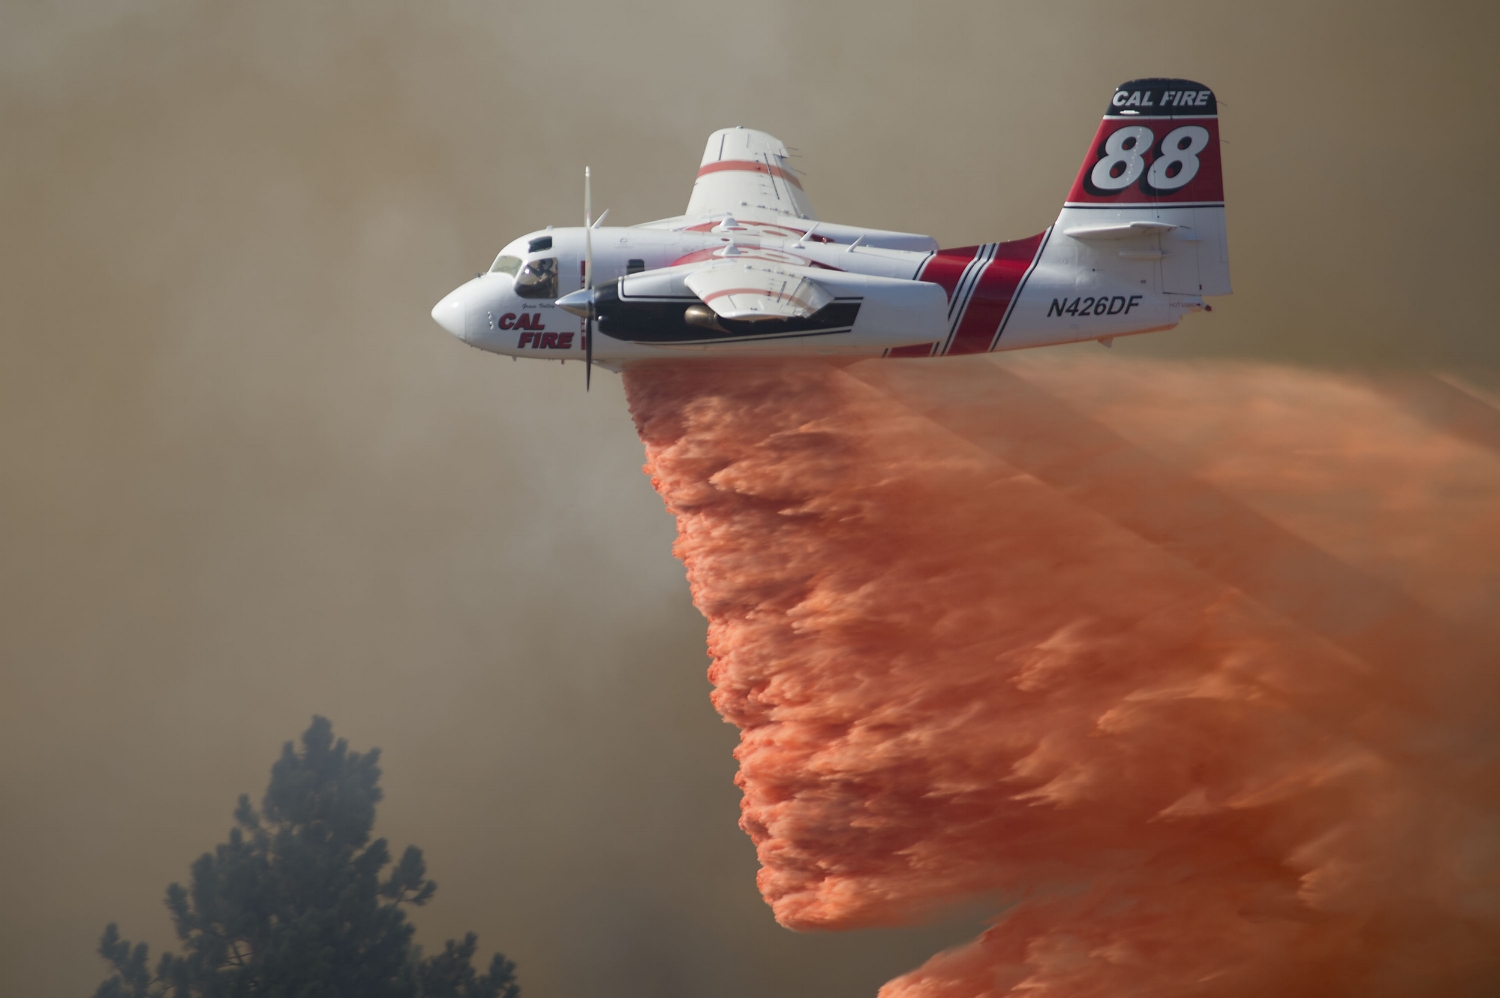  A Cal Fire aircraft drops fire retardant on a wild land fire burning near the Story winery in Plymouth, CA on Friday, July 25, 2014. 